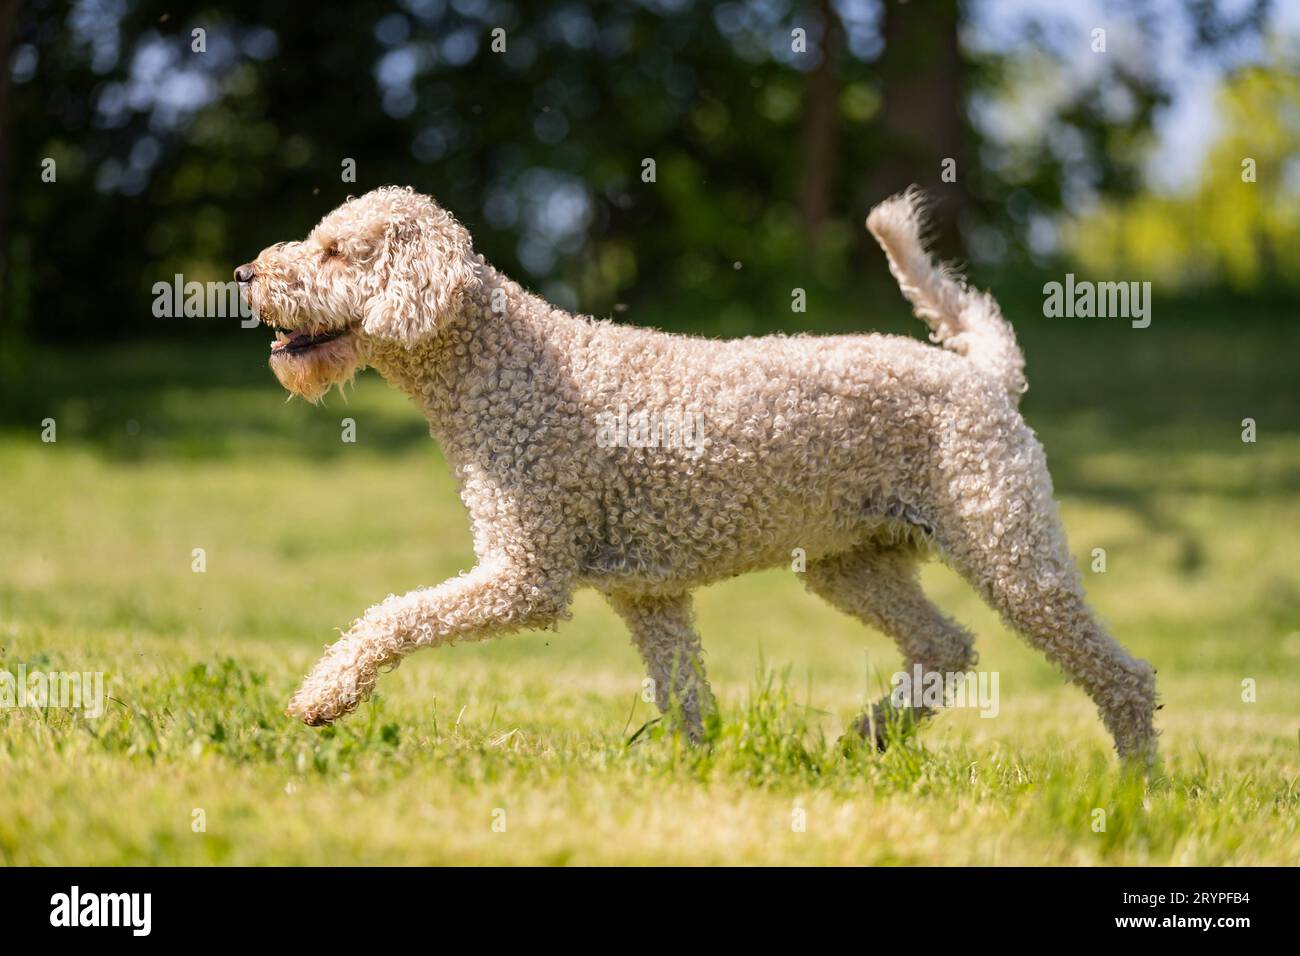 Labradoodle x Goldendoodle. Adult dog walking on a lawn. Germany Stock Photo